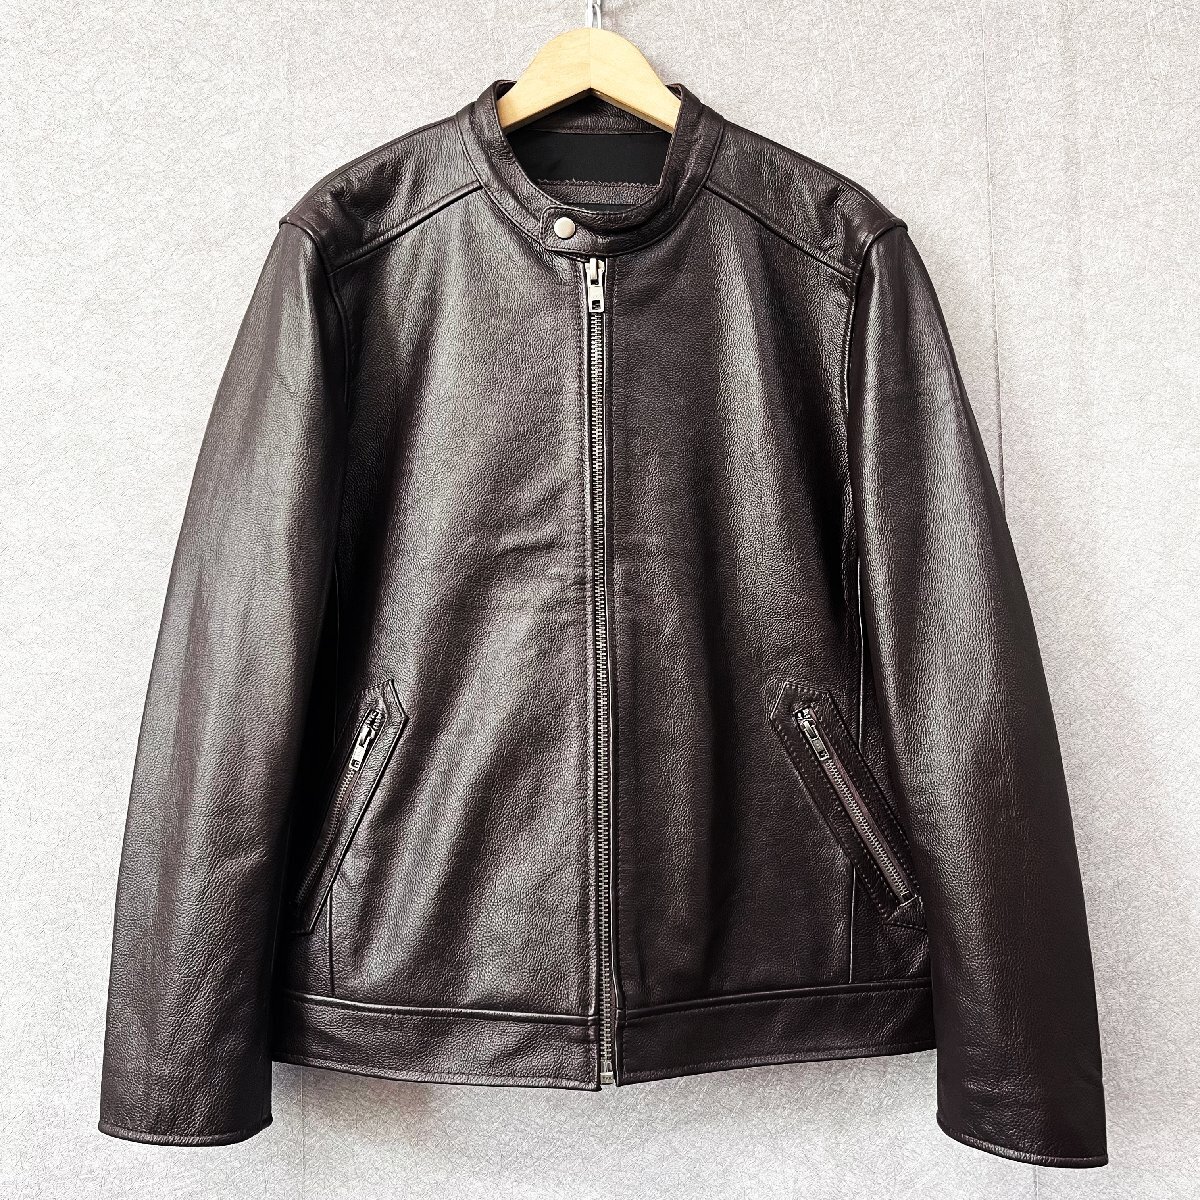  high grade * leather jacket regular price 15 ten thousand *Emmauela* Italy * milano departure * top class cow leather fine quality original leather Rider's leather jacket rare outer L/48 size 